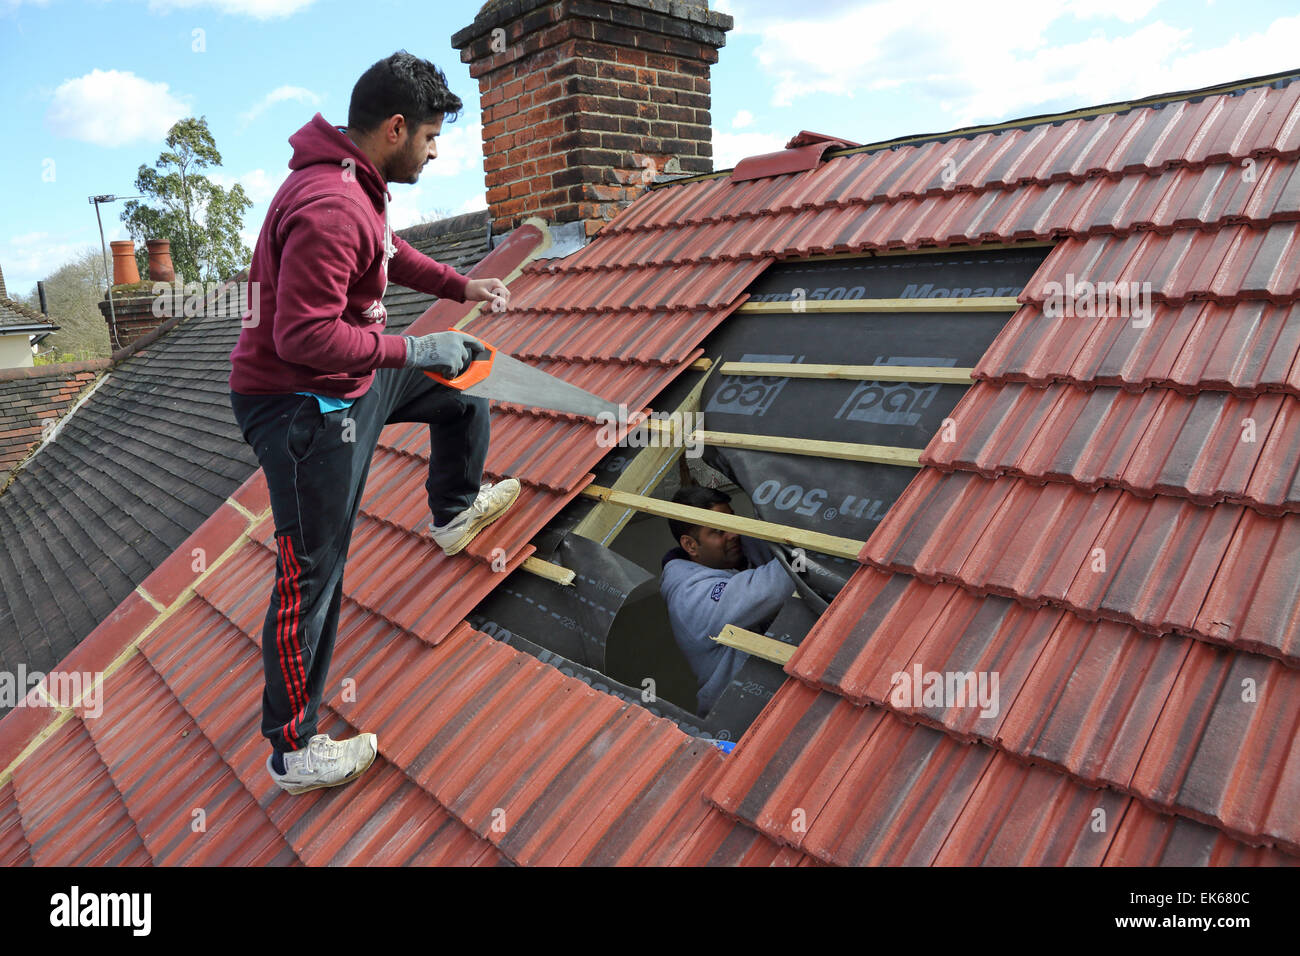 builders preparing to install a roof window on a pitched tiled roof in South London Stock Photo